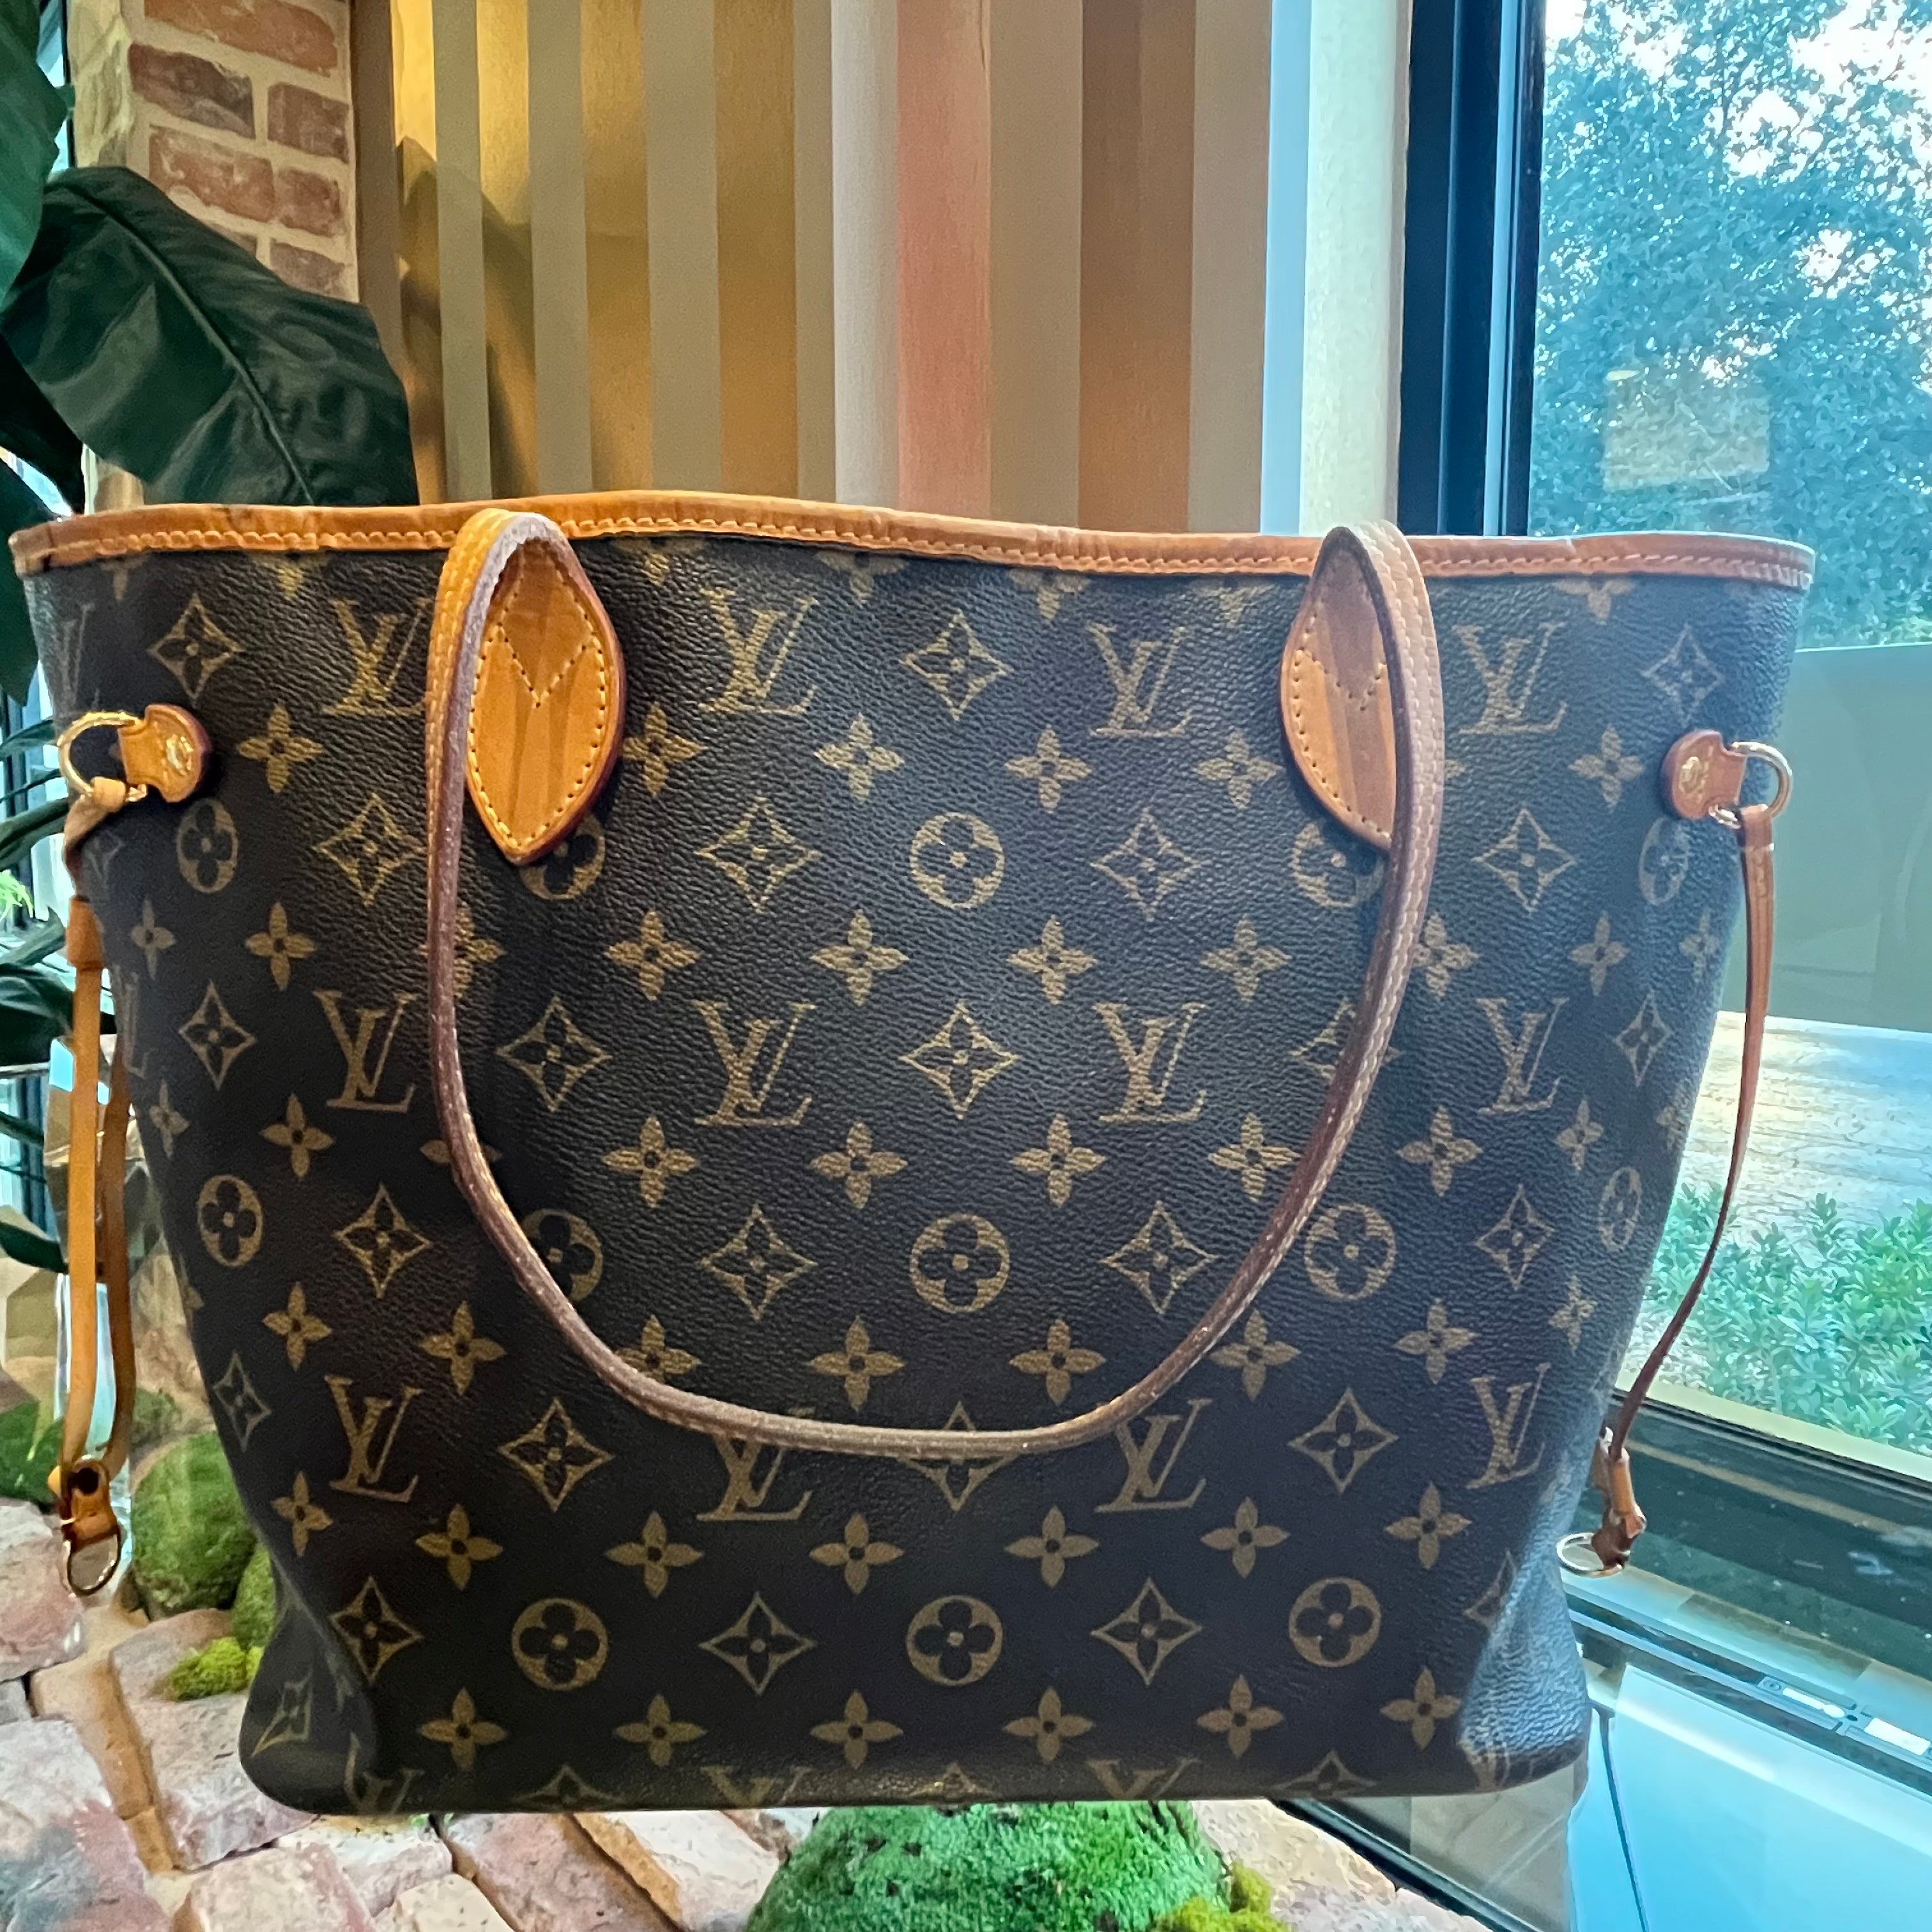 Lot - Louis Vuitton Neverfull MM Tote Bag